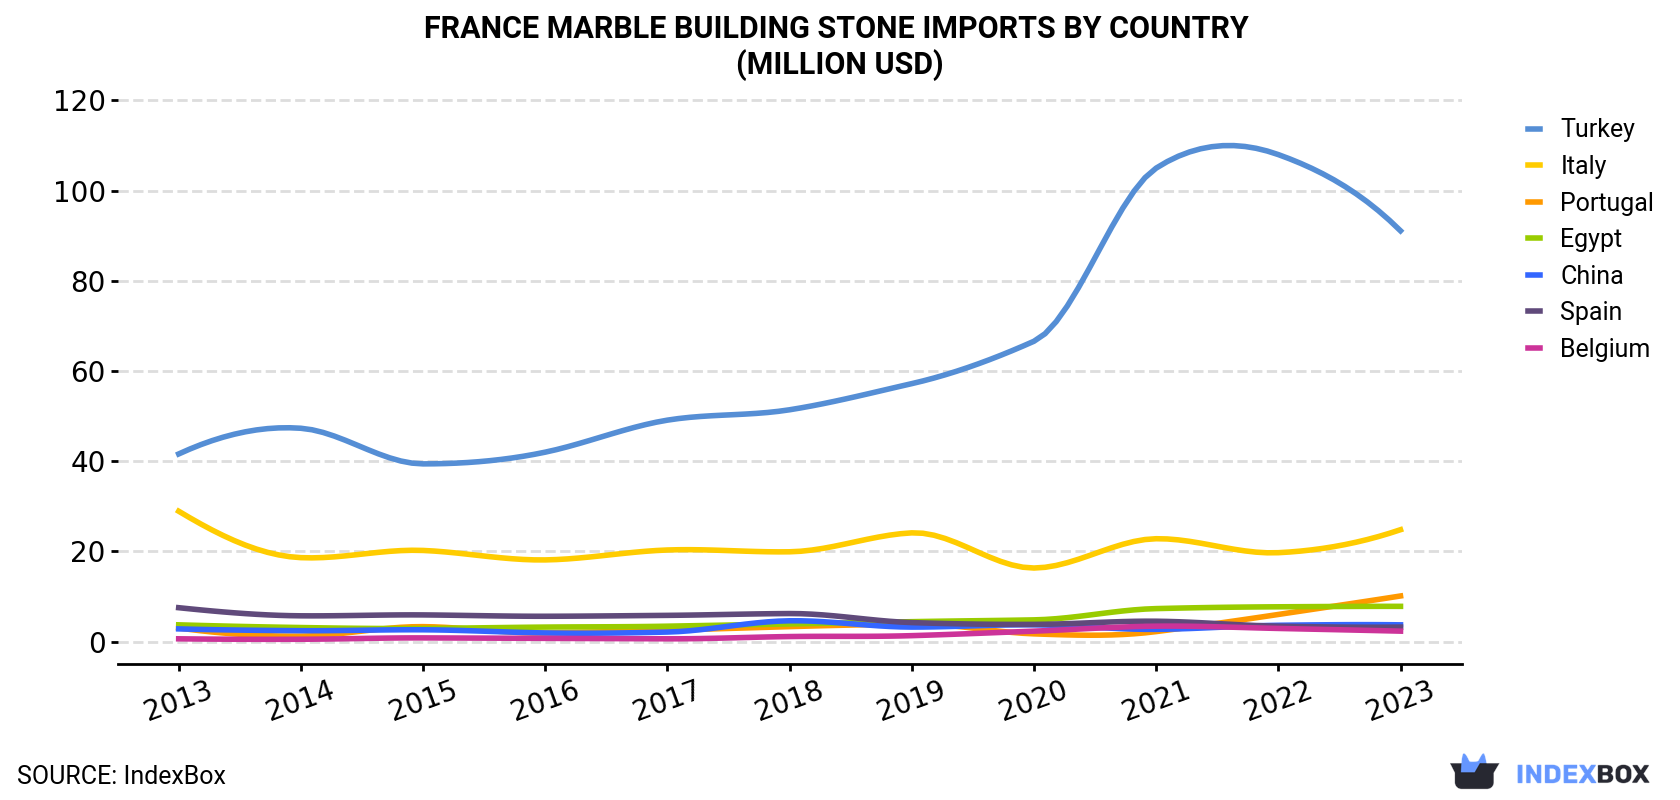 France Marble Building Stone Imports By Country (Million USD)